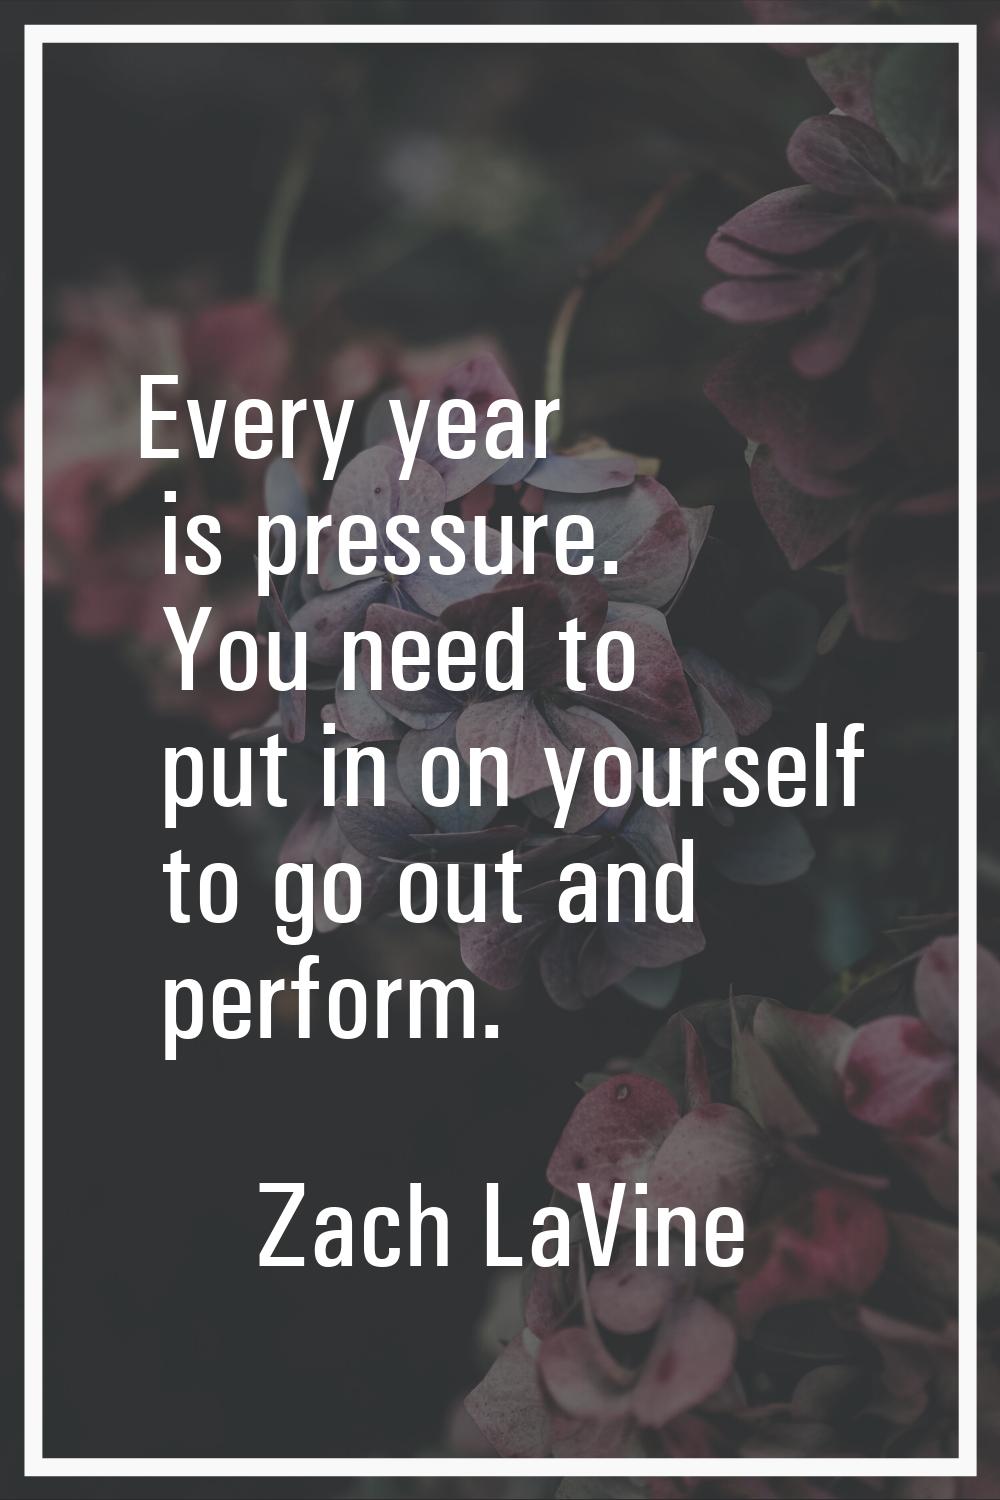 Every year is pressure. You need to put in on yourself to go out and perform.